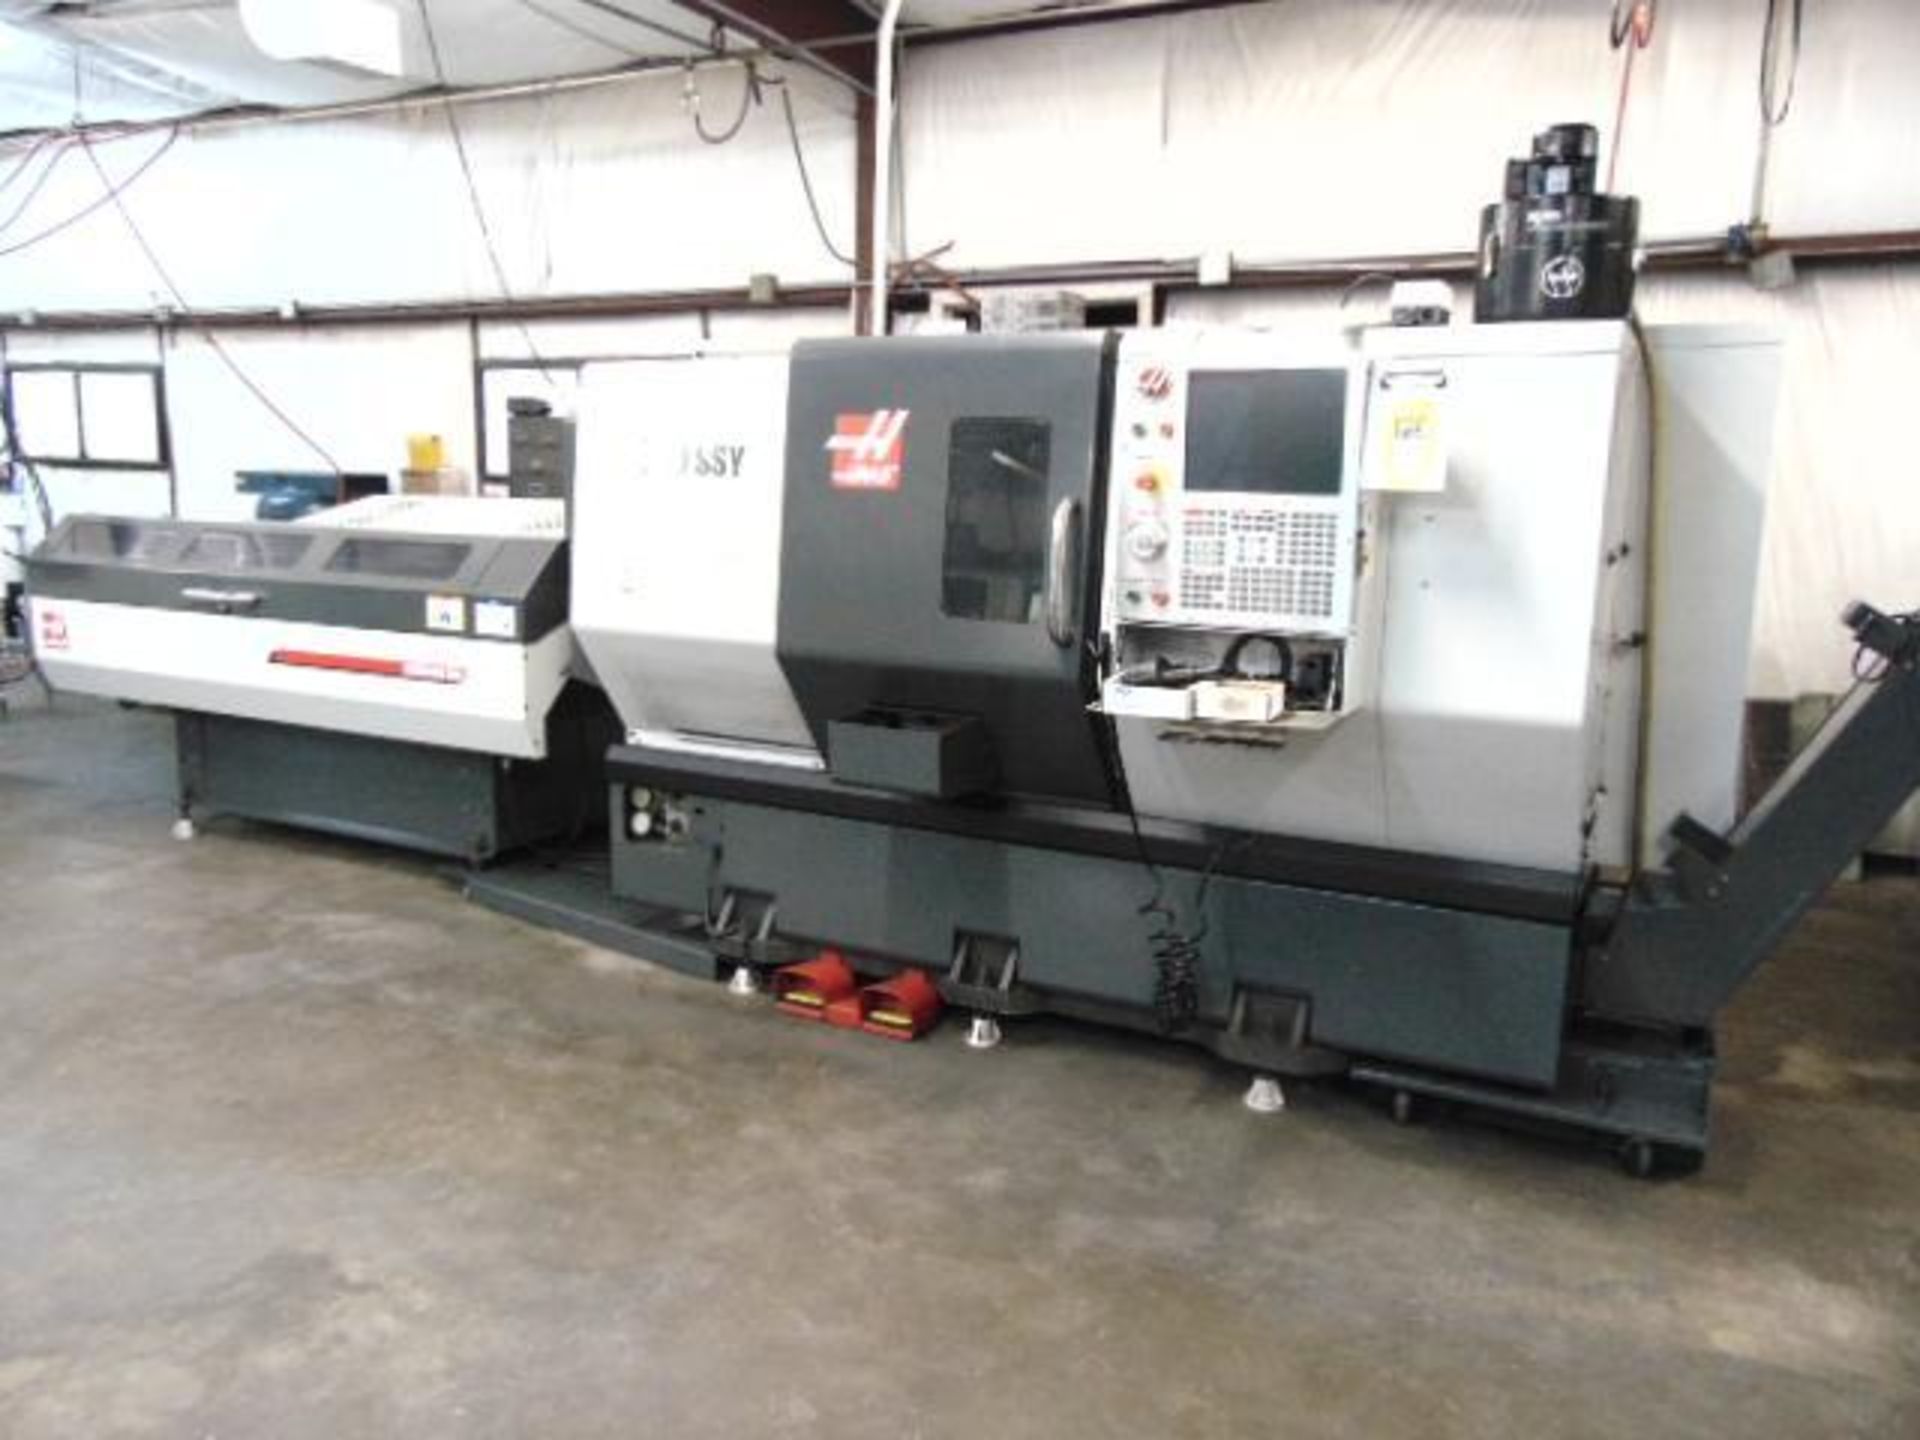 MULTI-AXIS CNC TURNING CENTER, HAAS MDL. ST-20SSY, new 2012, Haas CNC control, live milling, Y-axis,